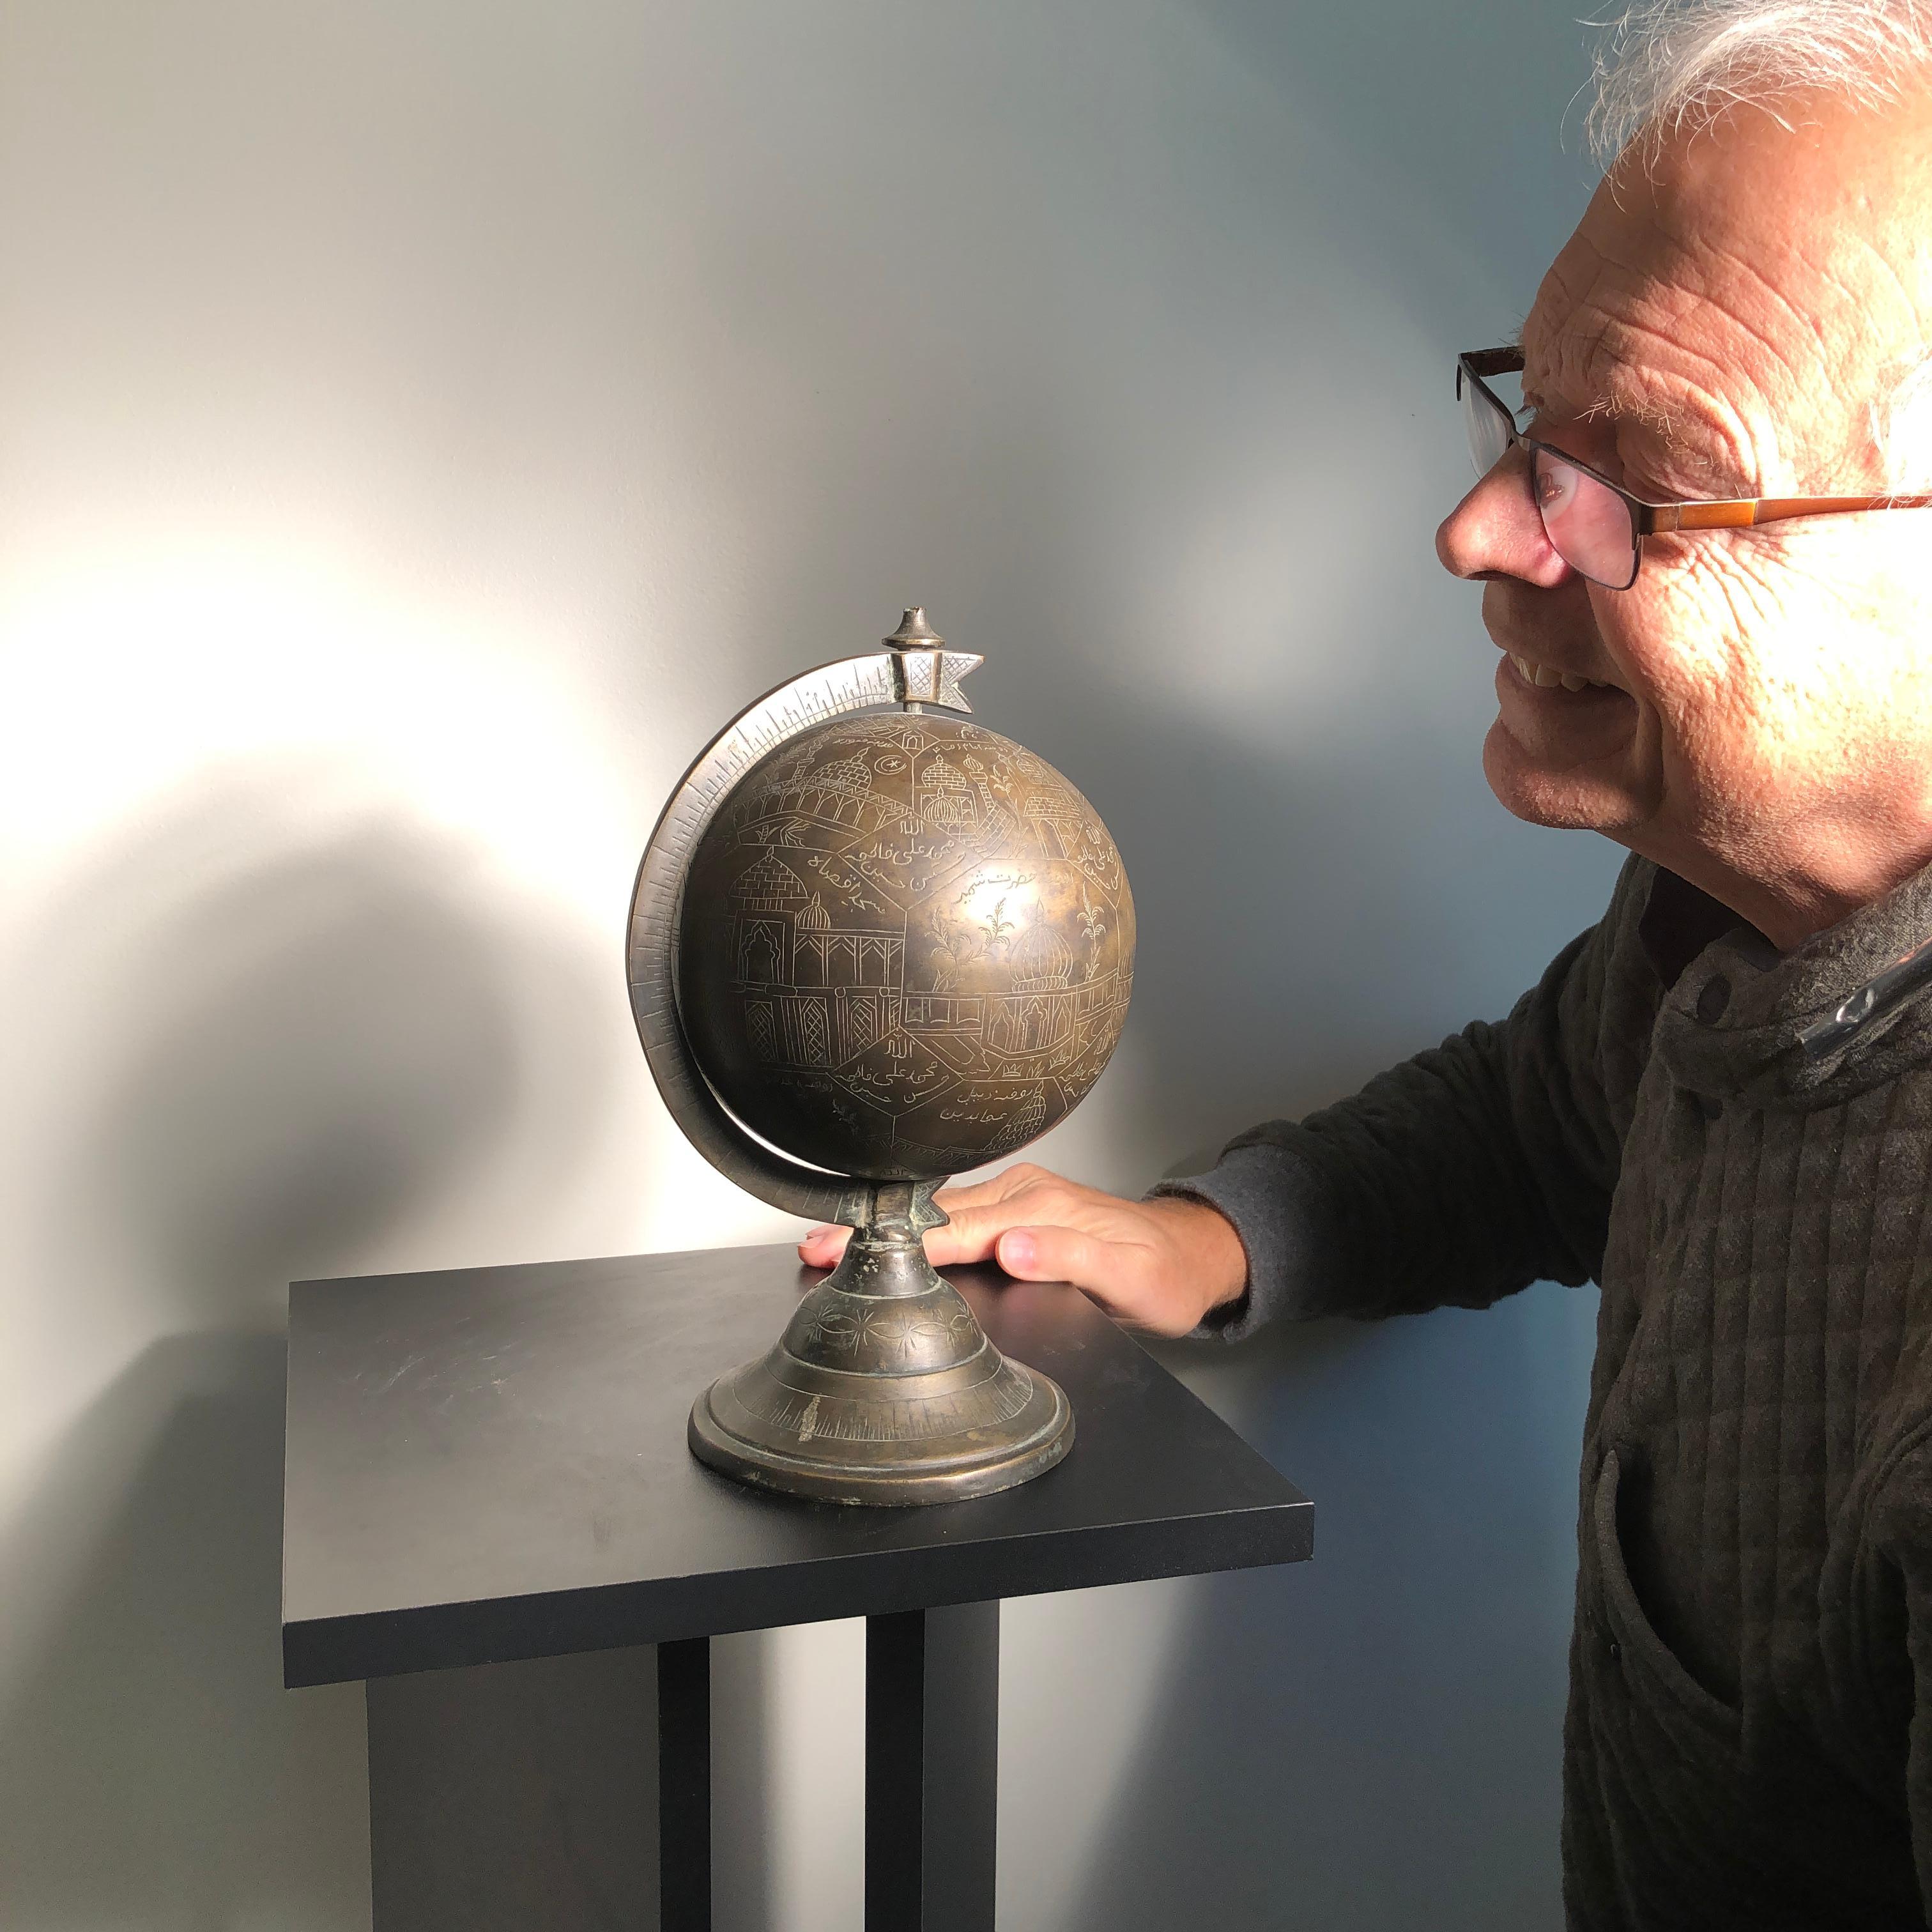 An unusual one-of-a-kind bronze globe or sphere Intricately engraved in commemoration of the holy sites of Islam , India, early 20th century. 

Provenance: Old Massachusetts collection collected in Mumbai 1960s 

Sites mentioned or referred to in